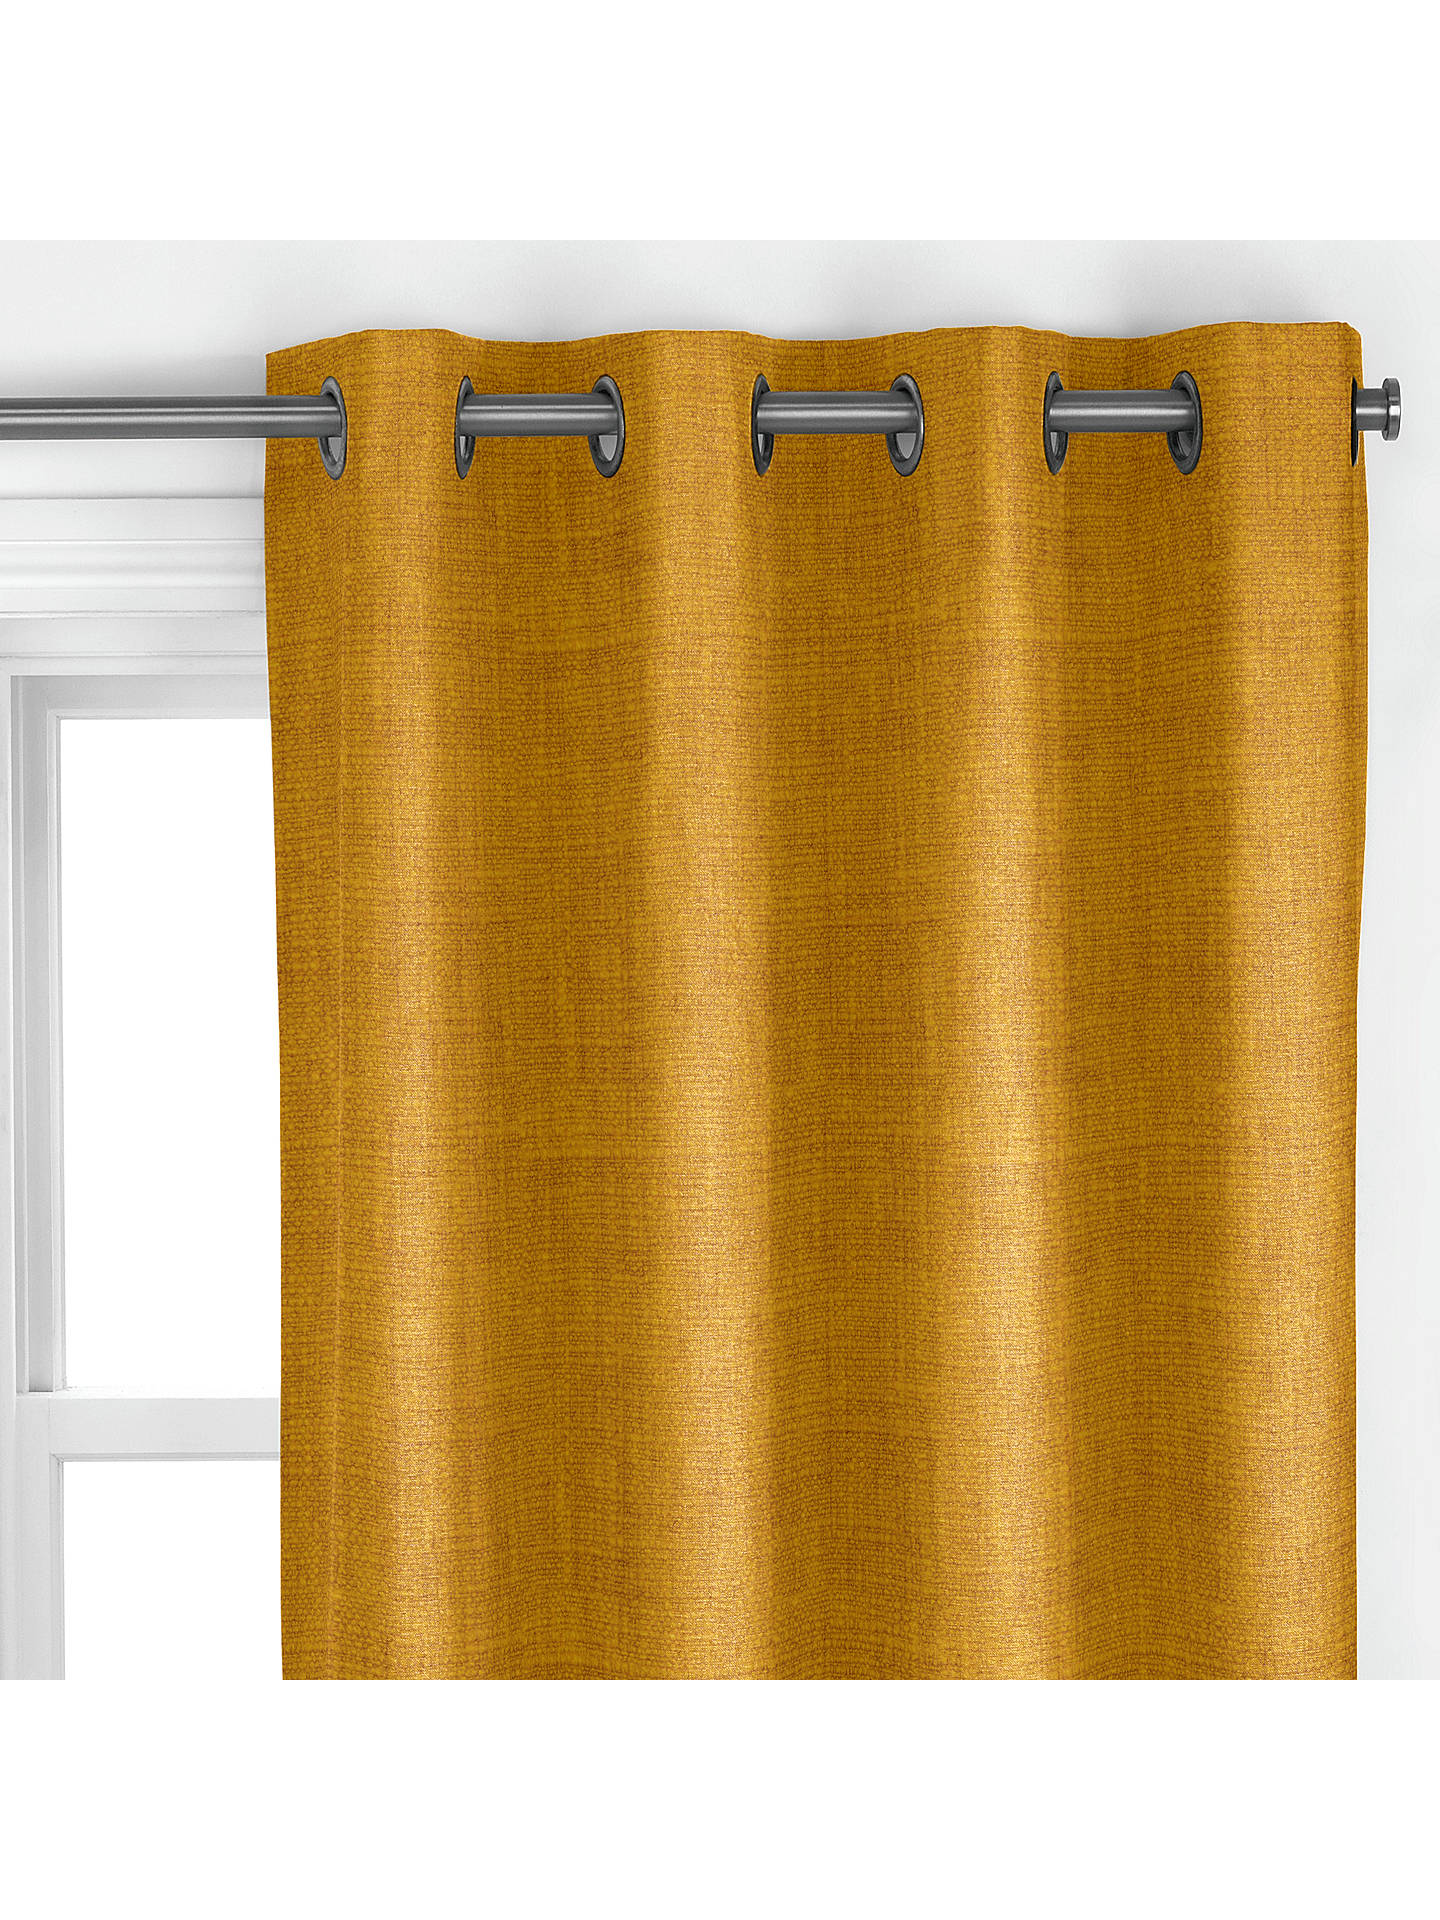 John Lewis Cotton Blend Made to Measure Curtains, Honey